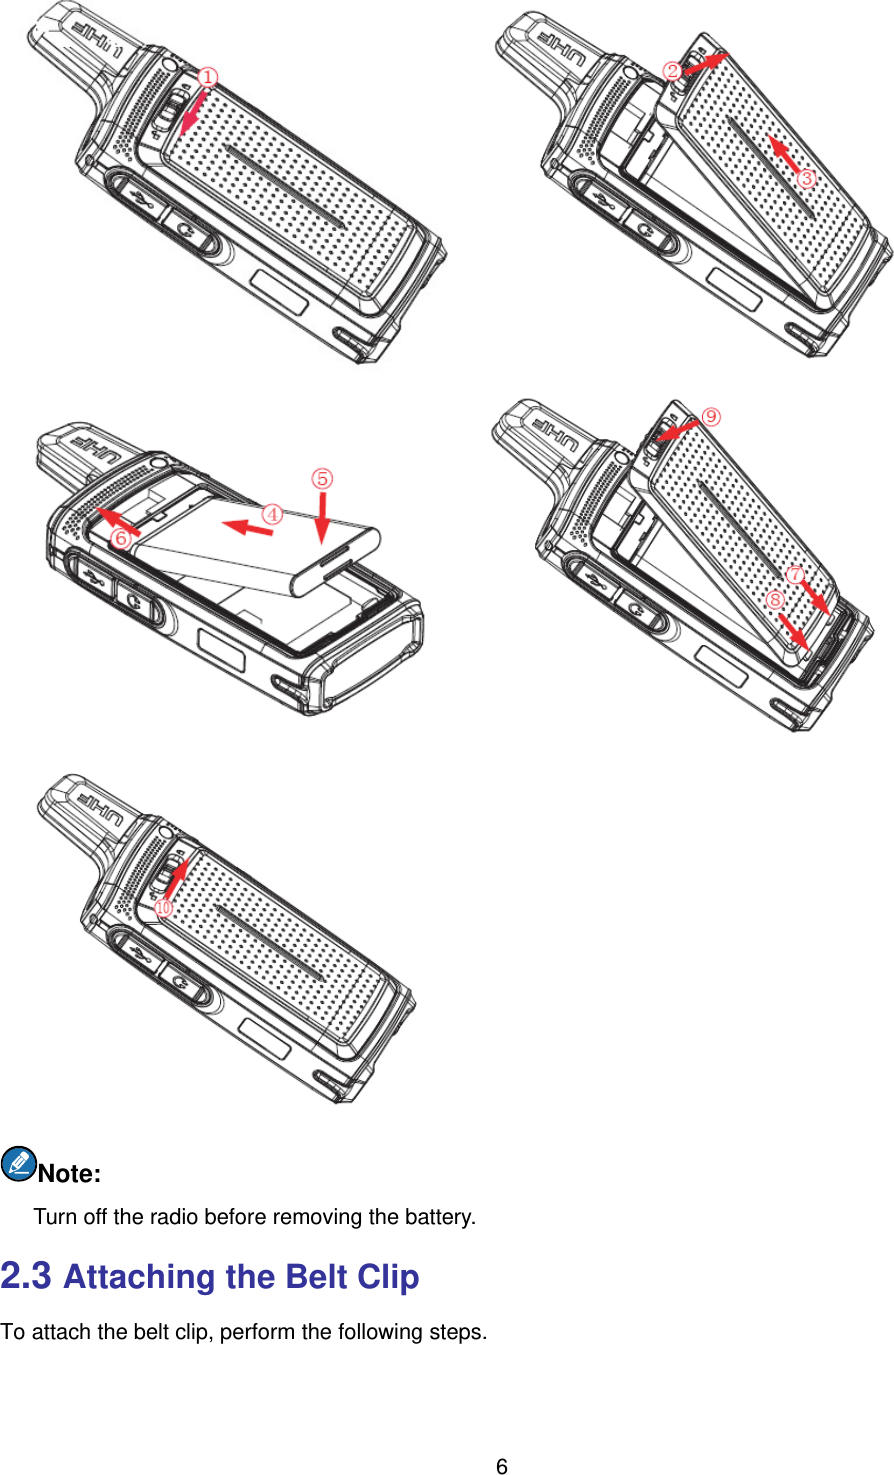  6     Note:  Turn off the radio before removing the battery.   2.3 Attaching the Belt Clip To attach the belt clip, perform the following steps.   